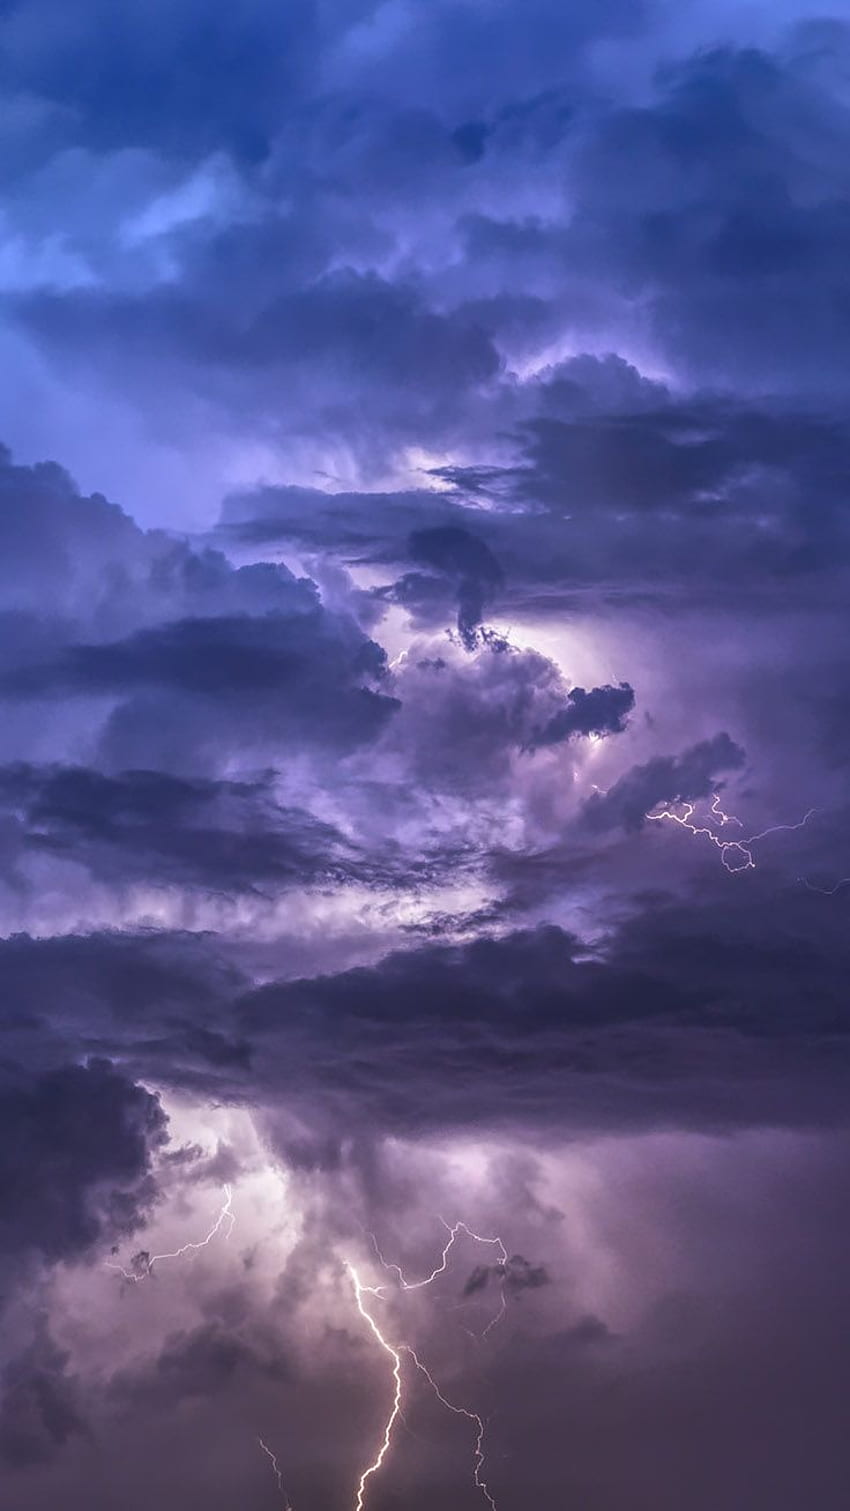 Lightning strikes over a dark sky with clouds - Storm